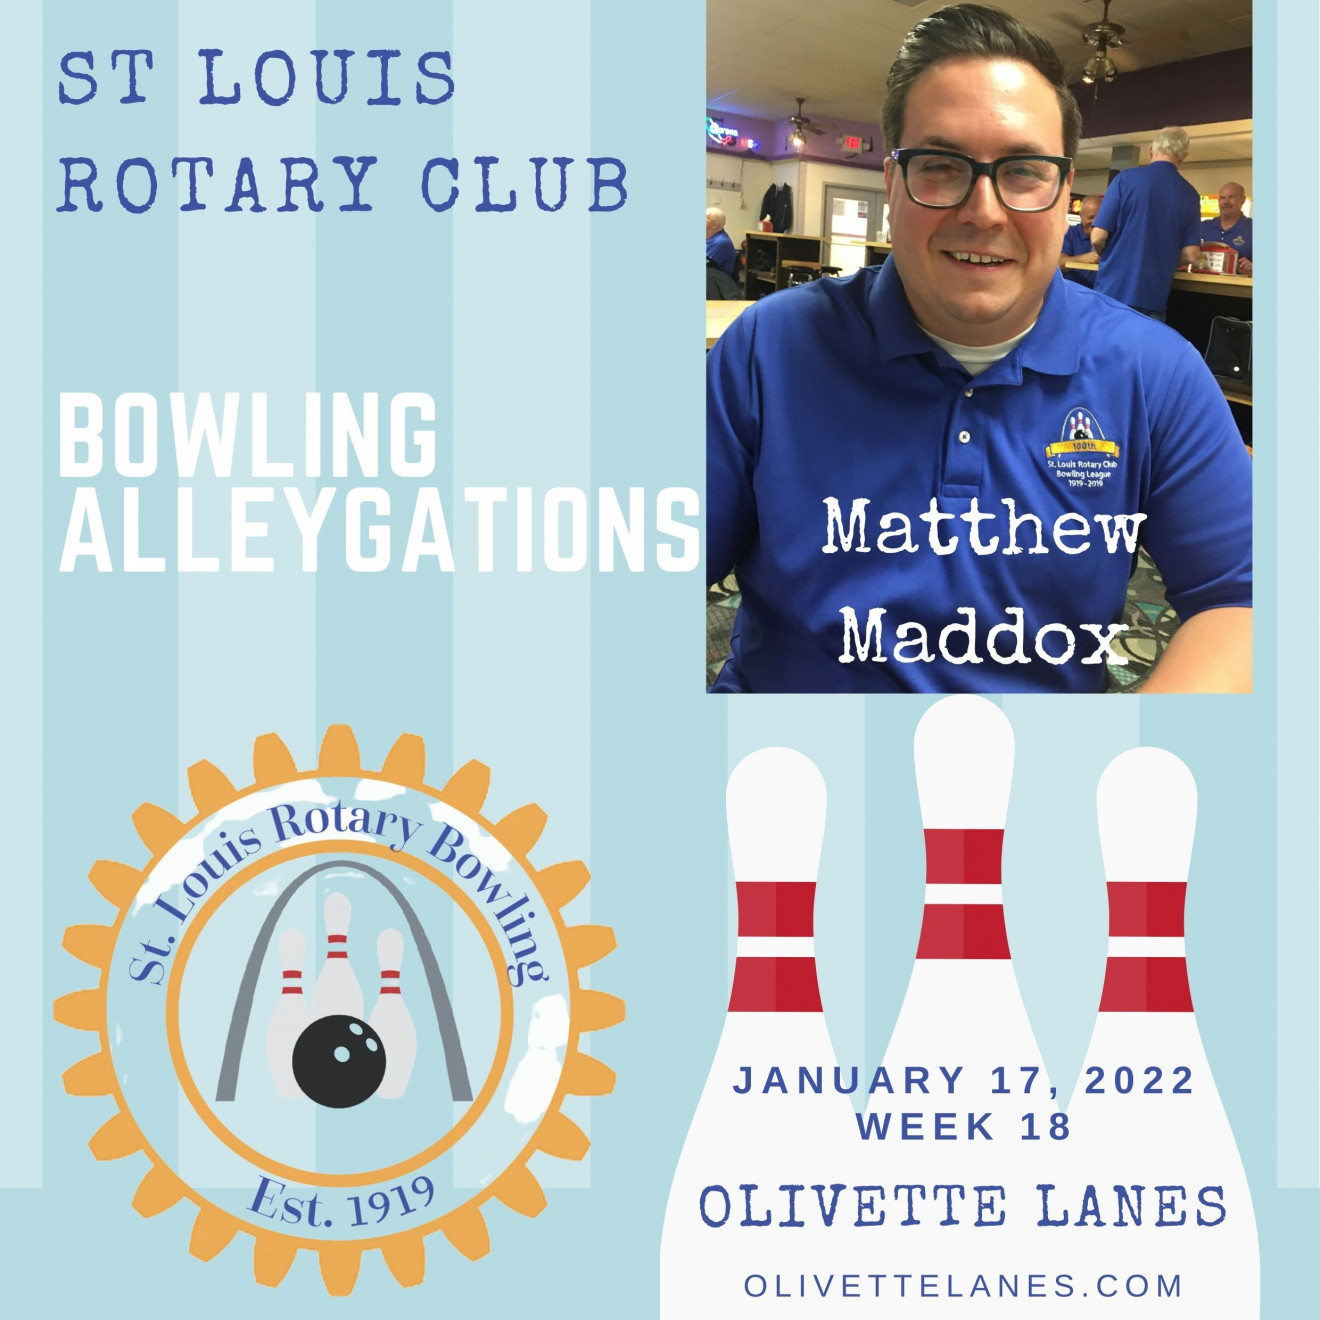 Matthew Maddox, Bowling Alleygations, Week 18 at Olivette Lanes